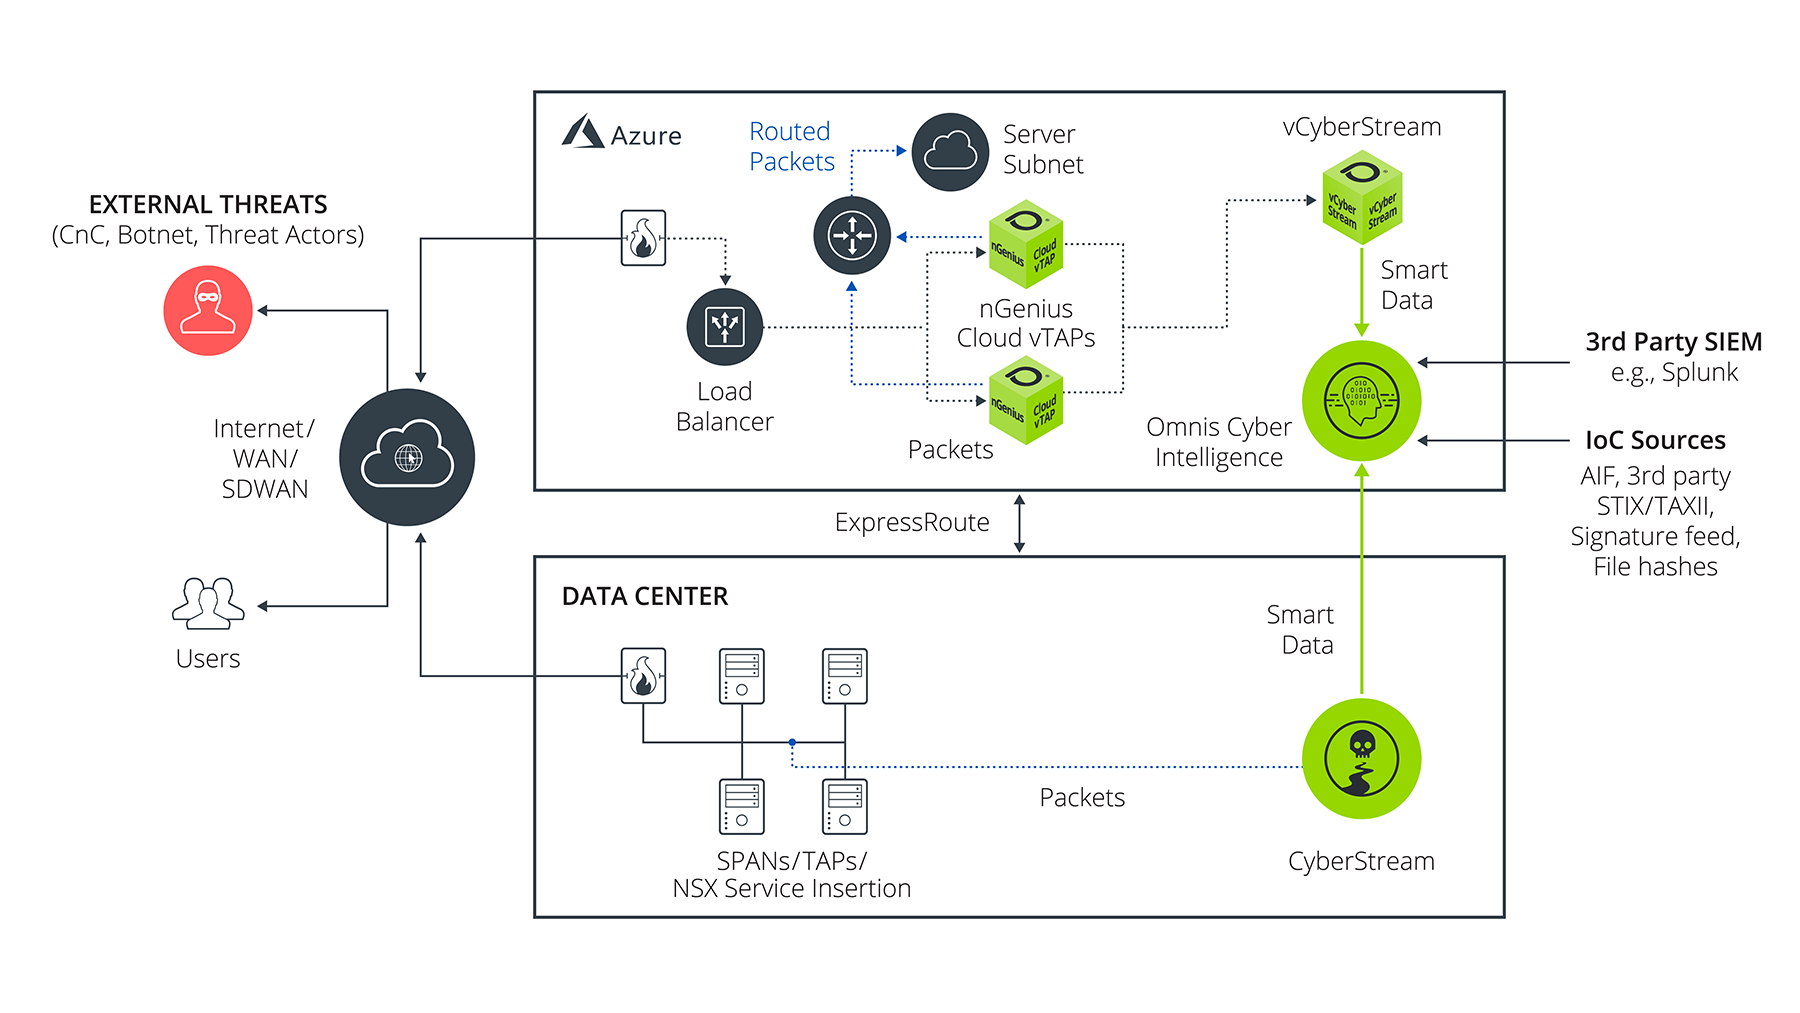 Advanced Network Detection and Response Platform for Azure